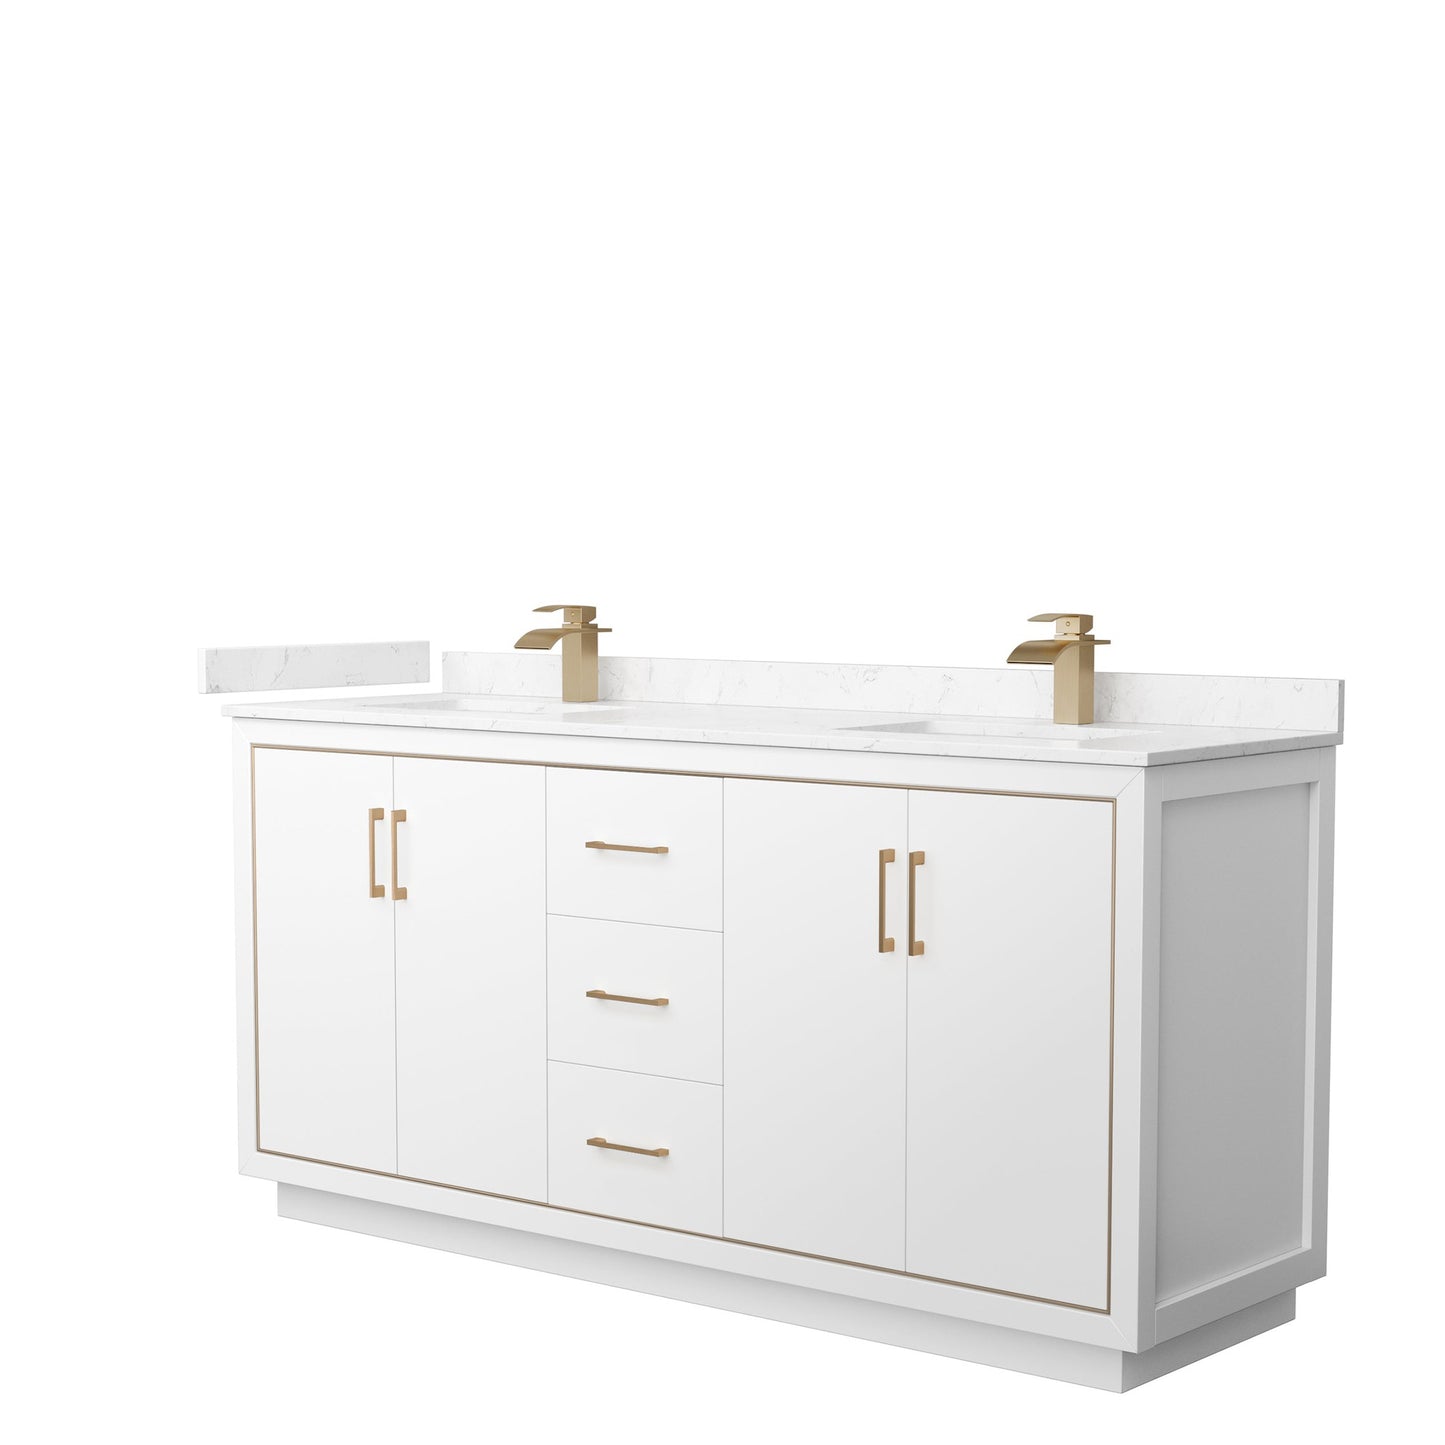 Wyndham Collection Icon 72" Double Bathroom Vanity in White, Carrara Cultured Marble Countertop, Undermount Square Sinks, Satin Bronze Trim